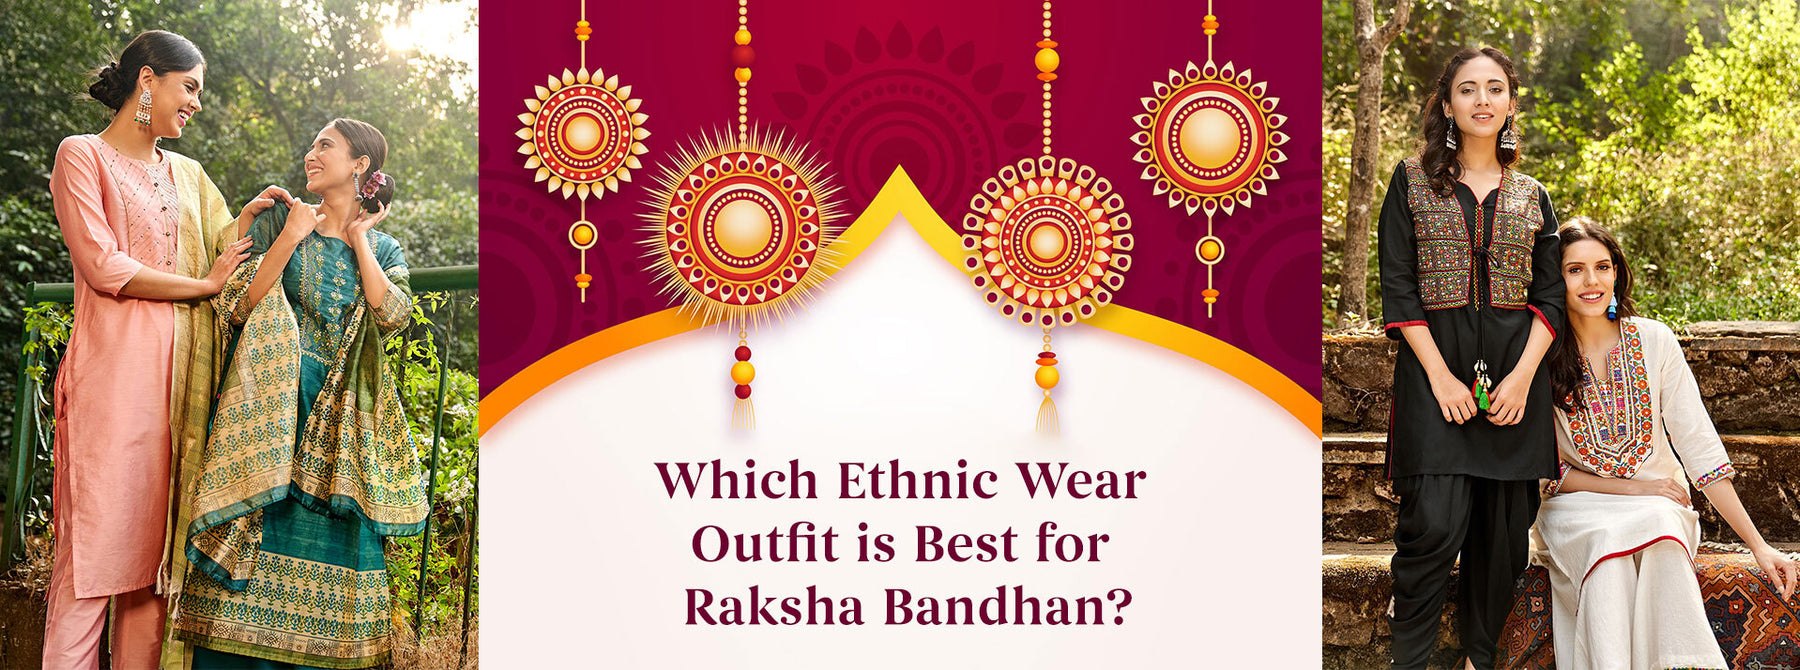 Which Ethnic Wear Outfit is Best for Raksha Bandhan